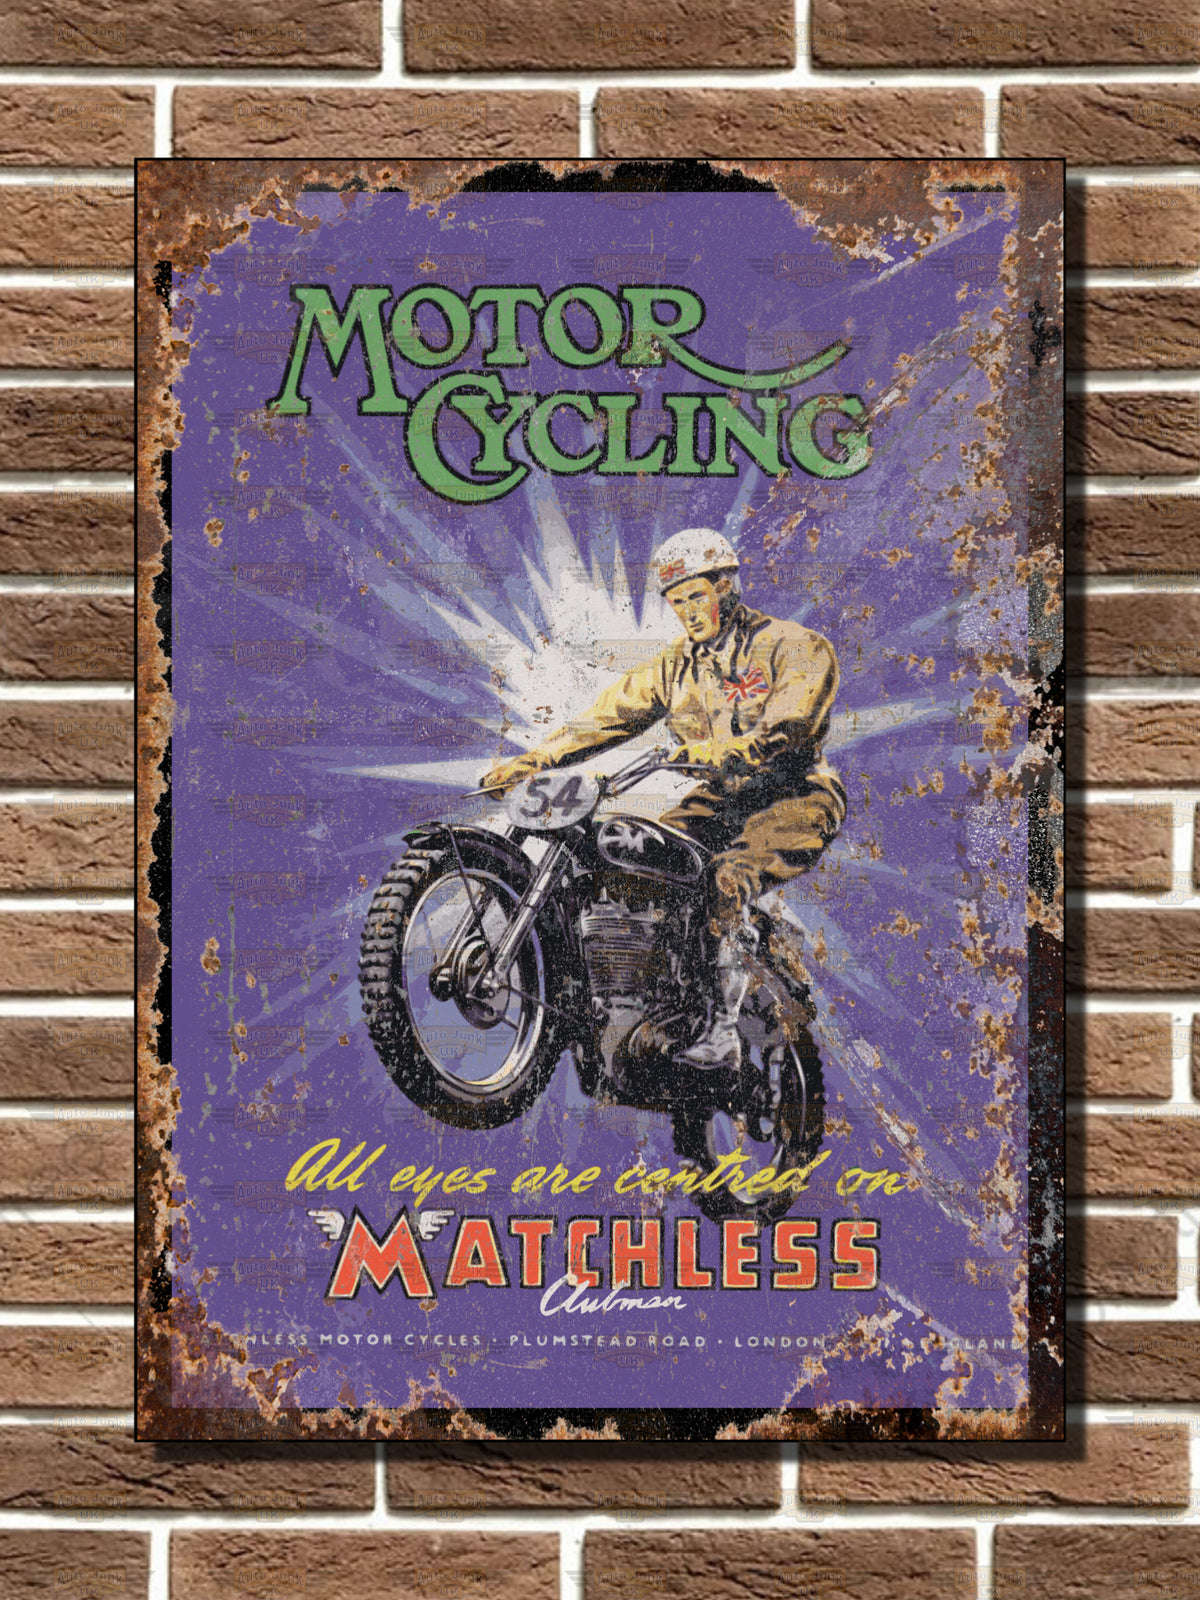 Matchless Motor Cycling Metal Sign